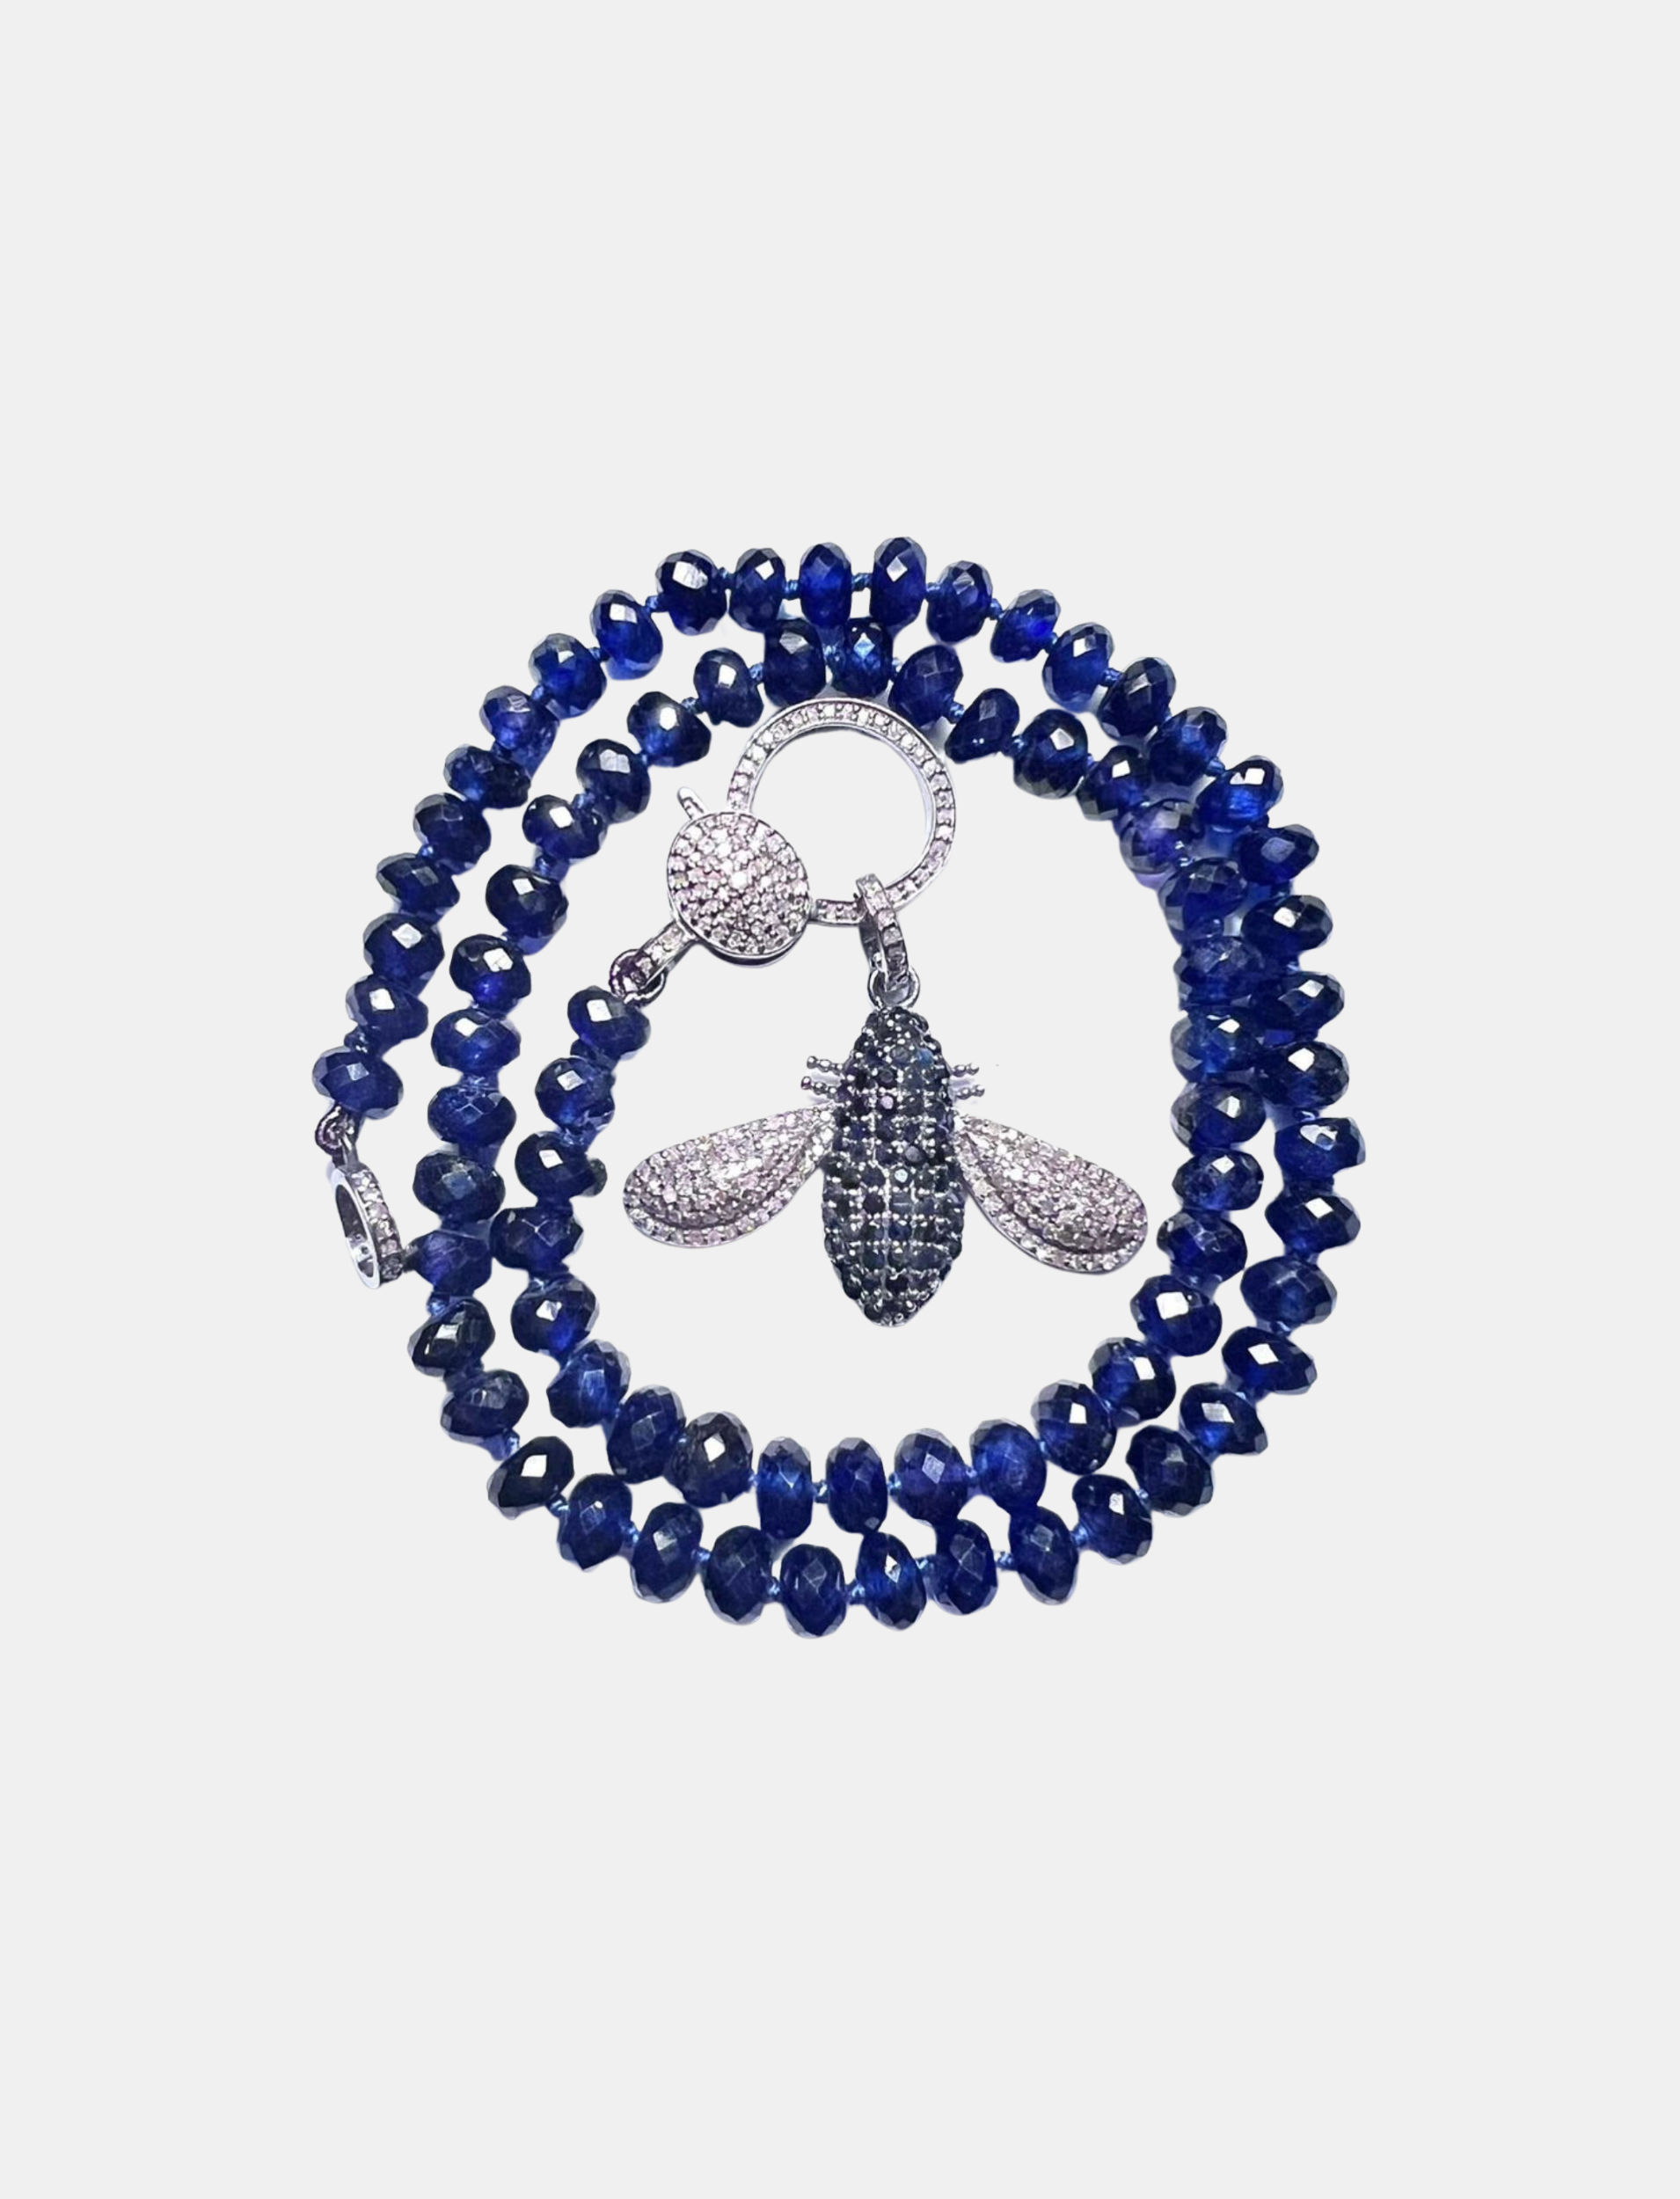 Blue Sapphire Knotted Necklace with Blue Sapphire Bee